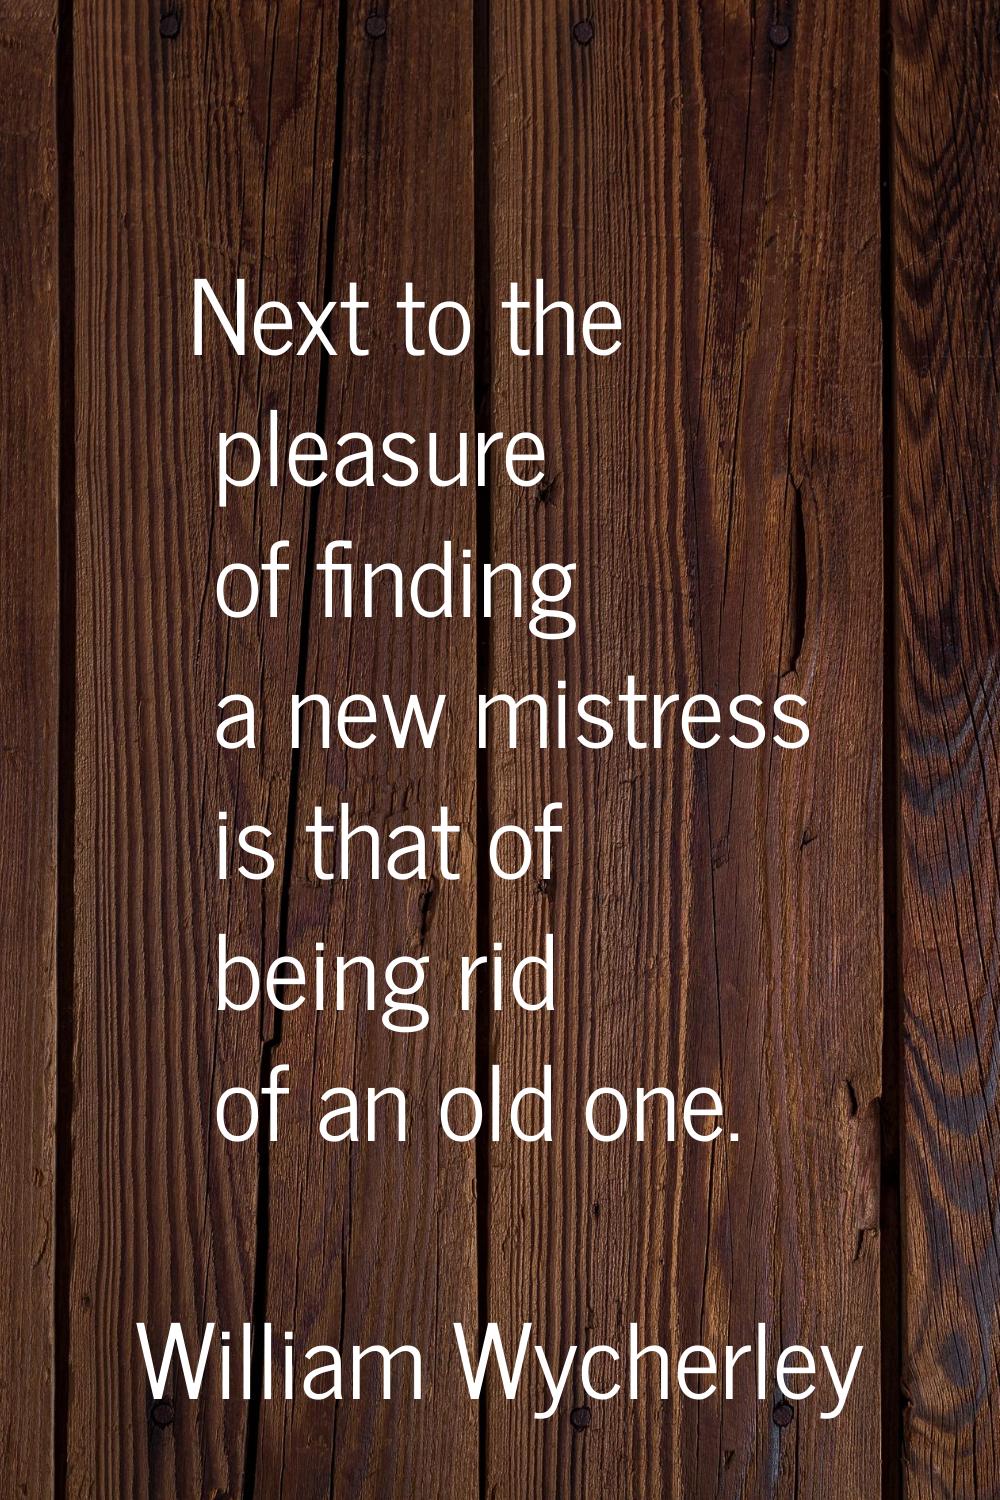 Next to the pleasure of finding a new mistress is that of being rid of an old one.